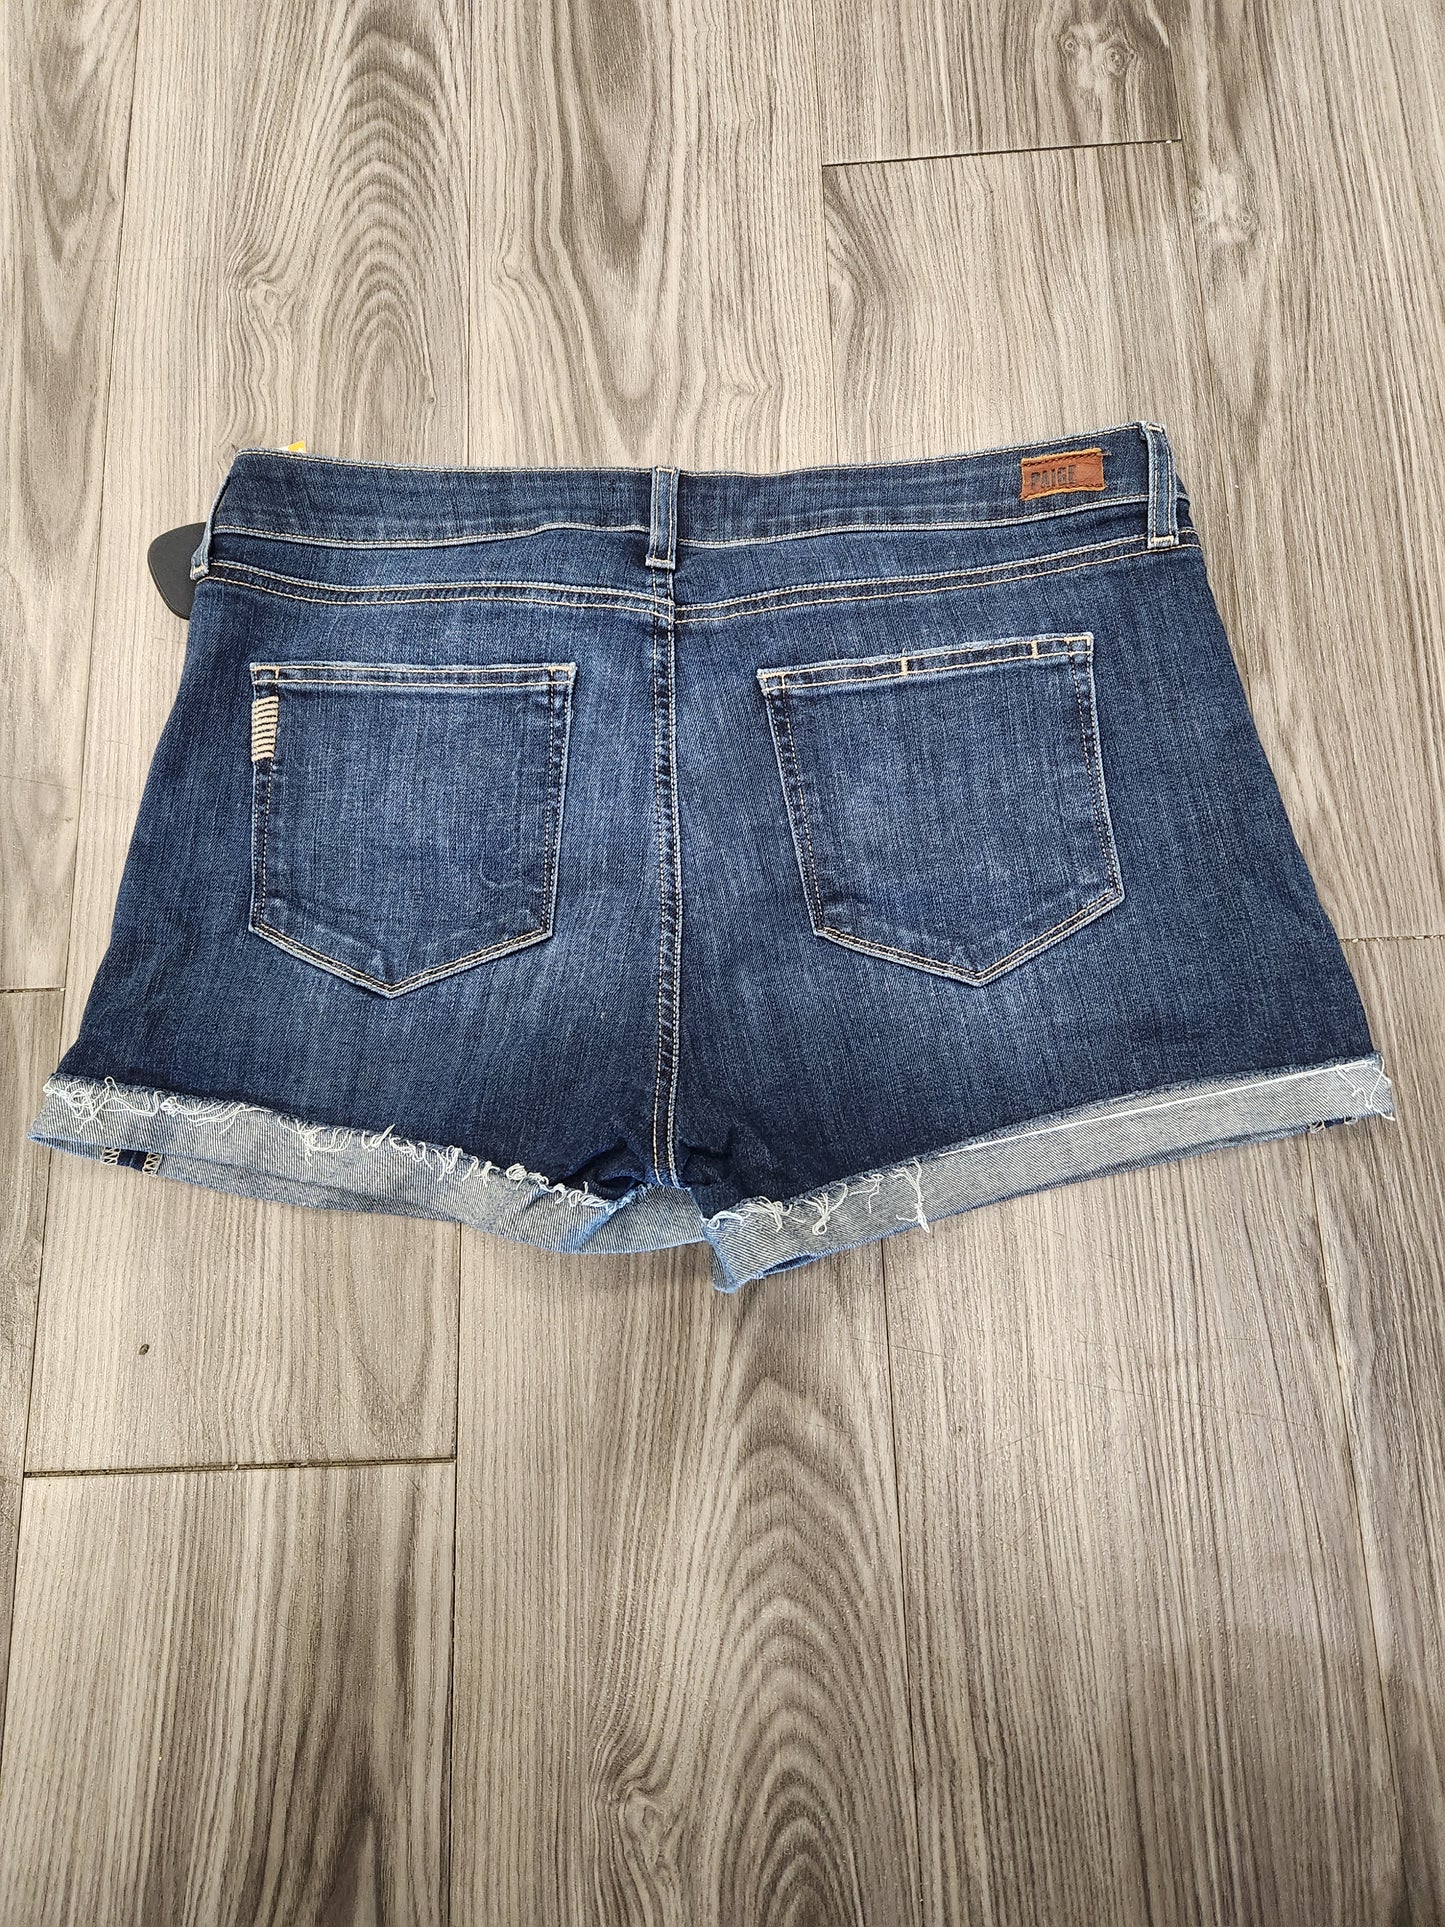 Shorts By Paige  Size: 8